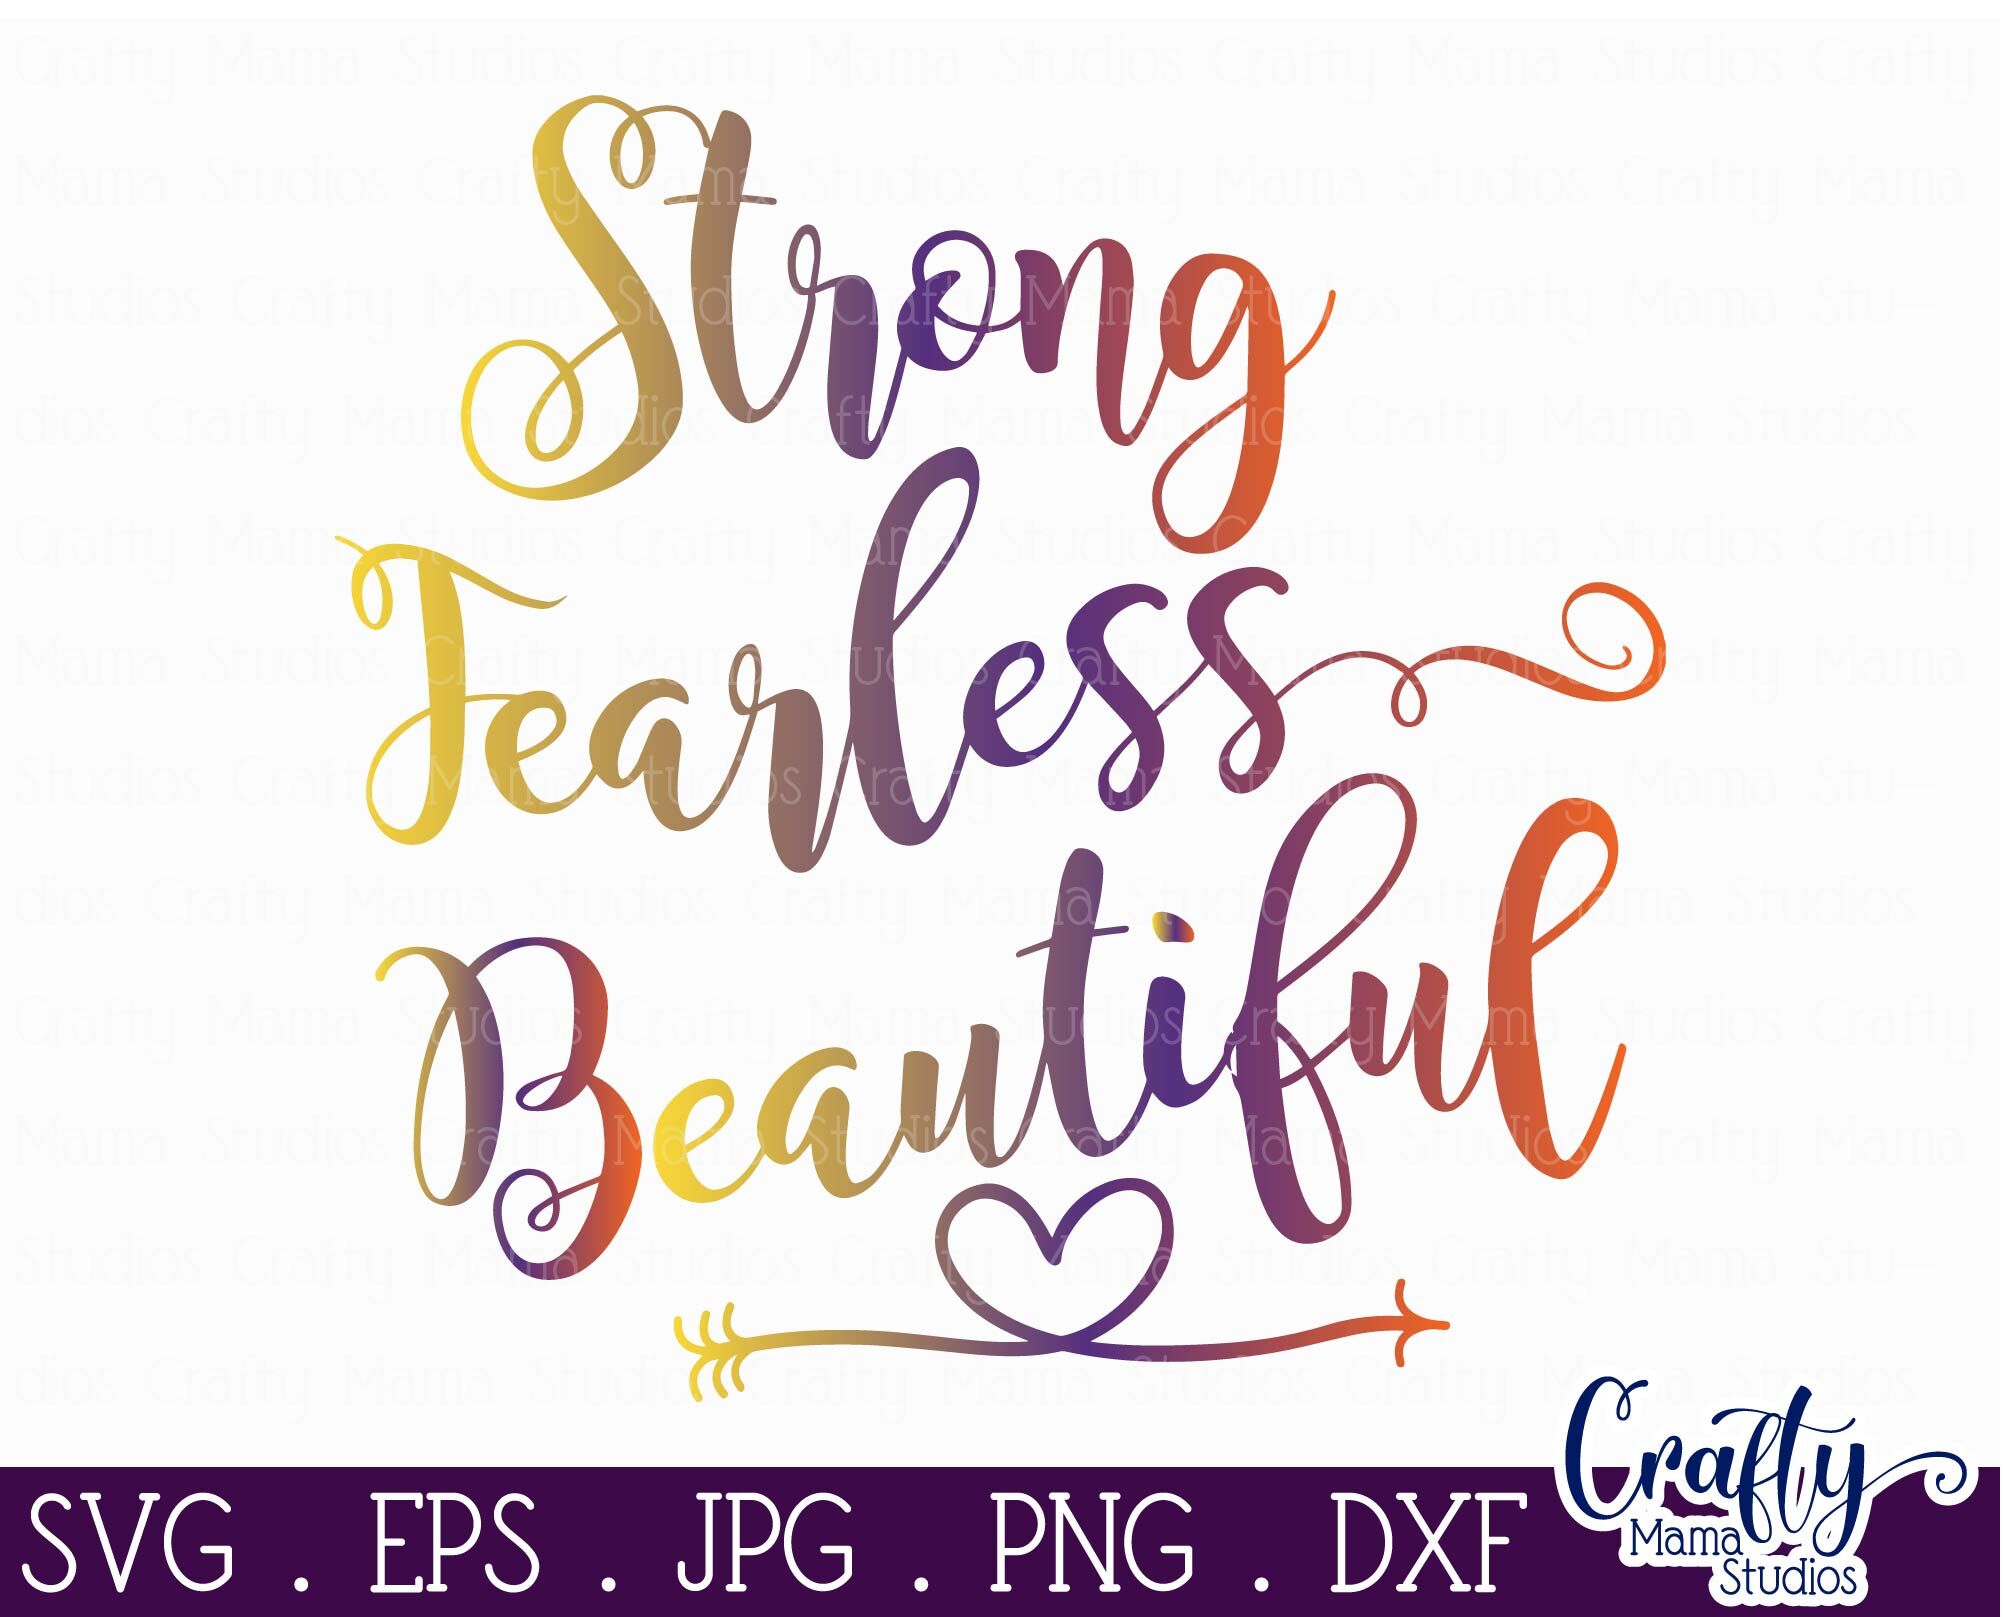 Strong Fearless Beautiful - Inspirational Svg By Crafty Mama Studios ...